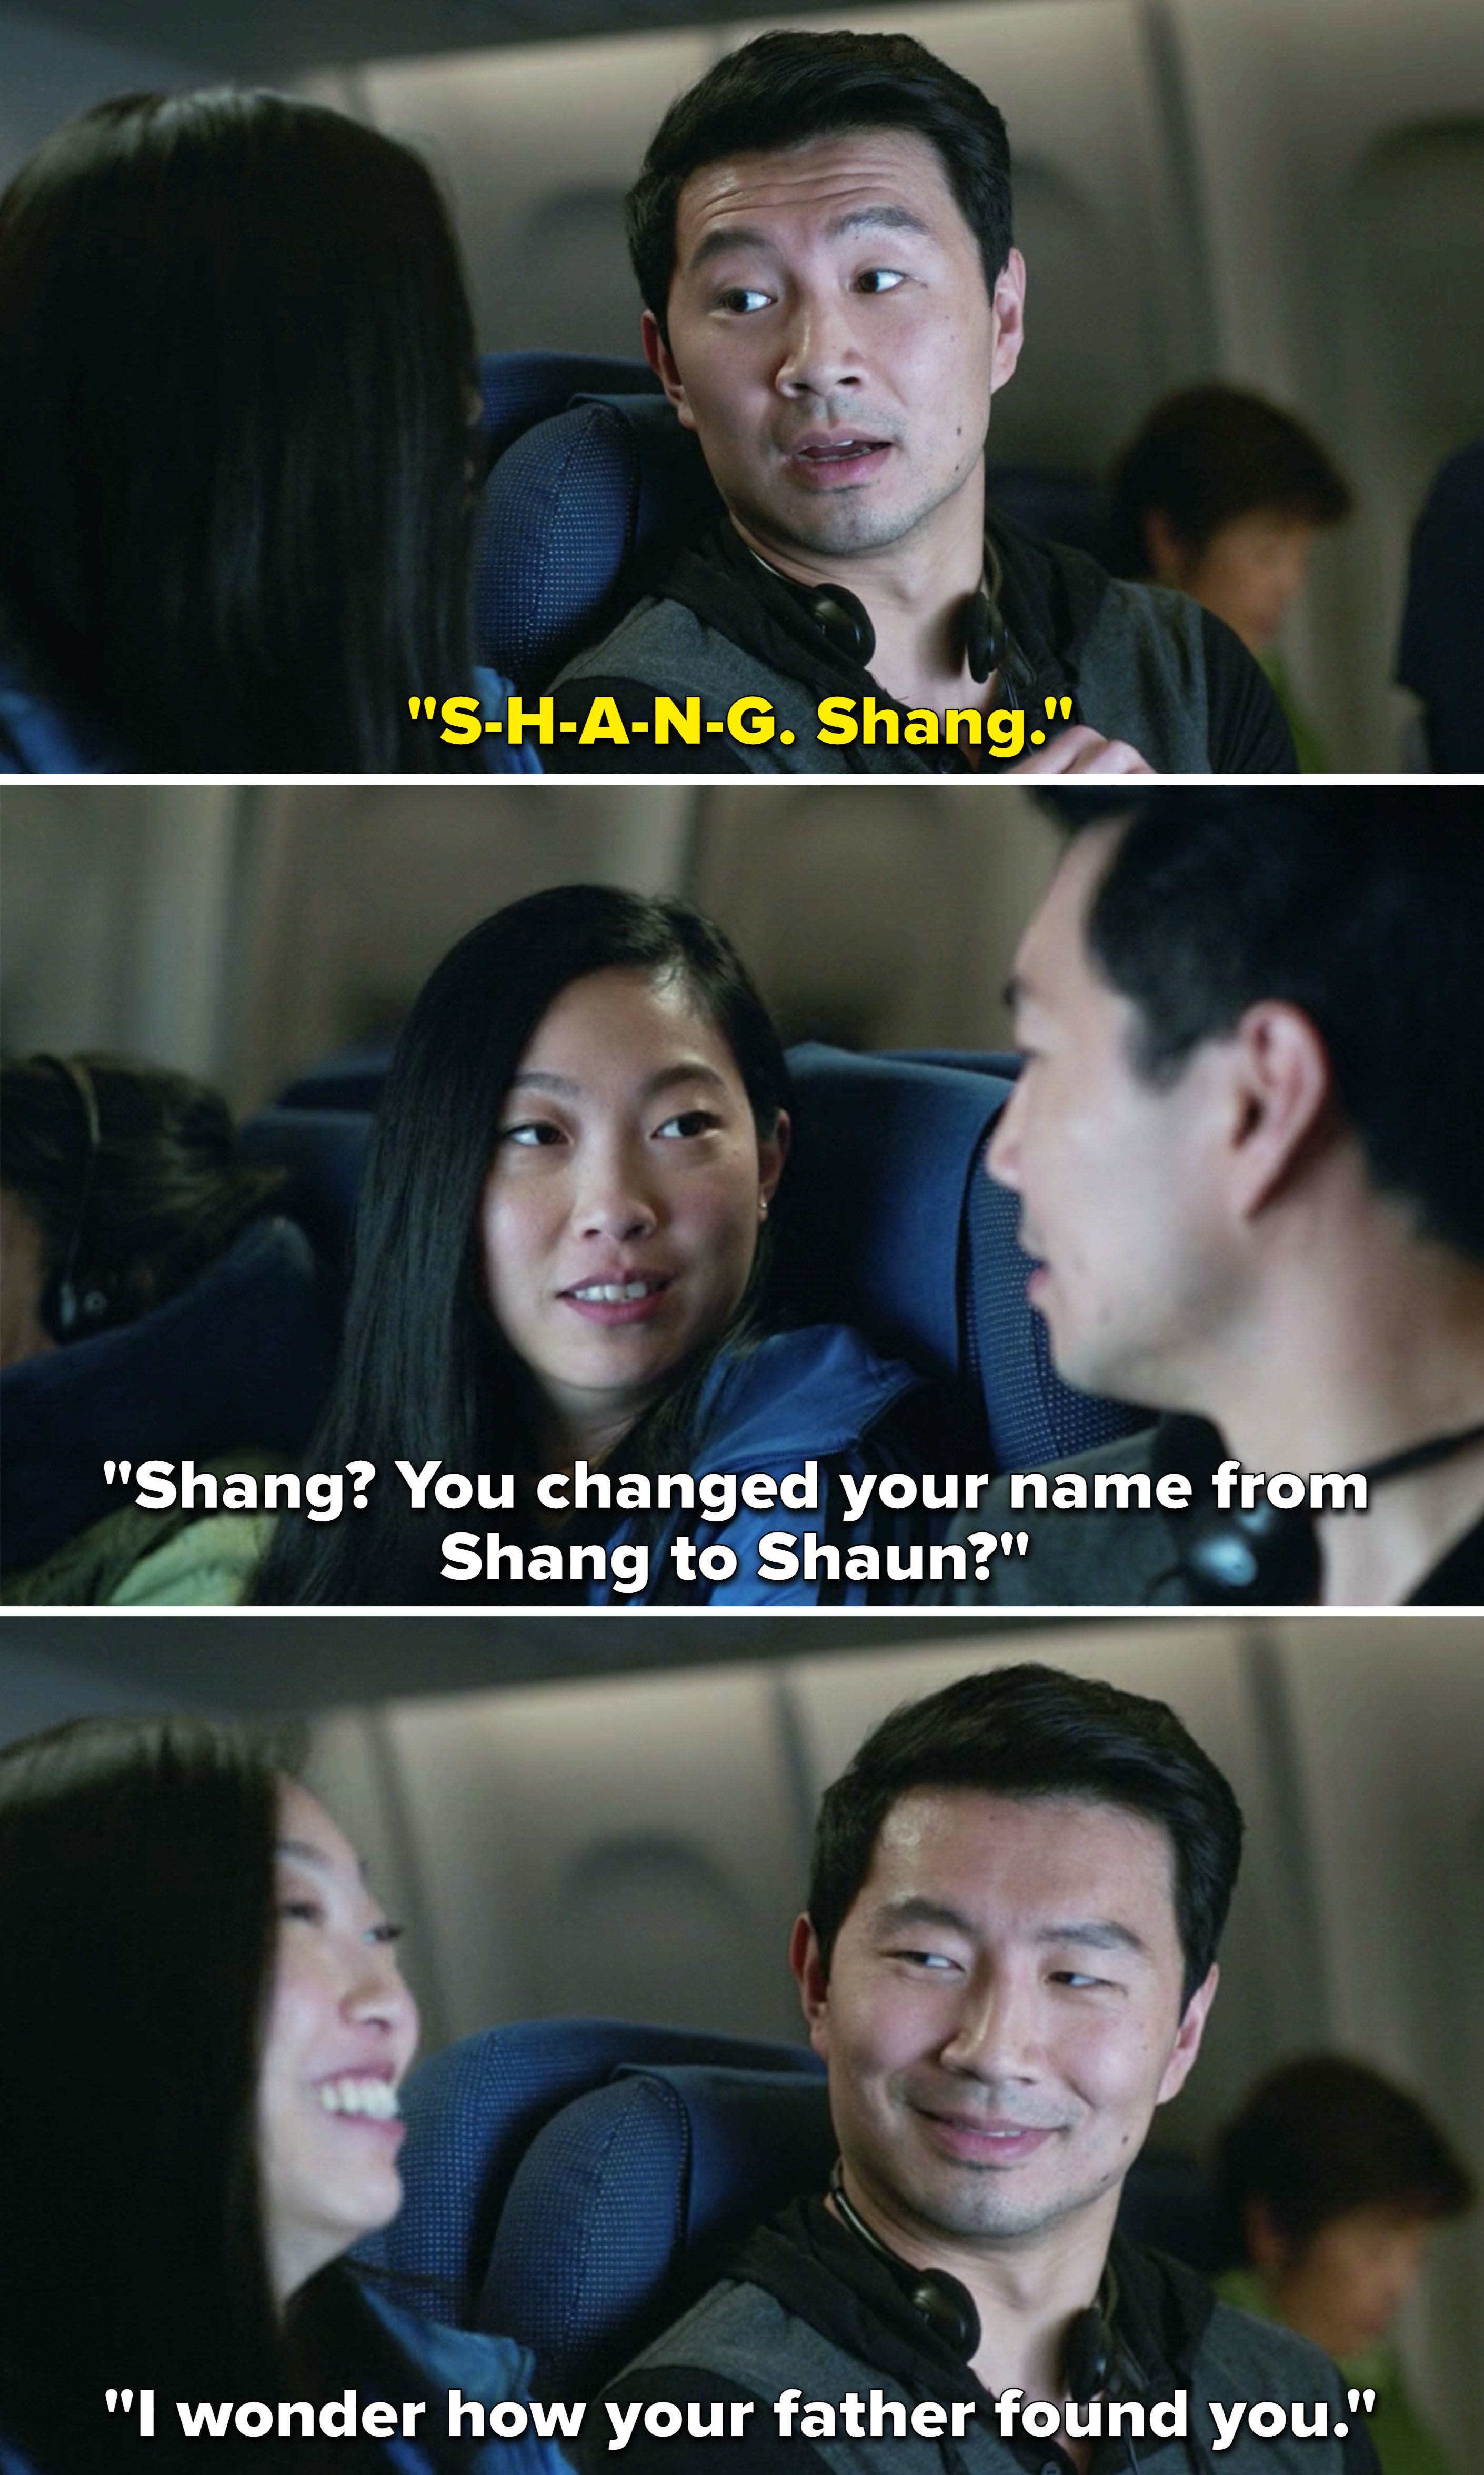 Katy making fun of him for changing his name from Shang to Shaun